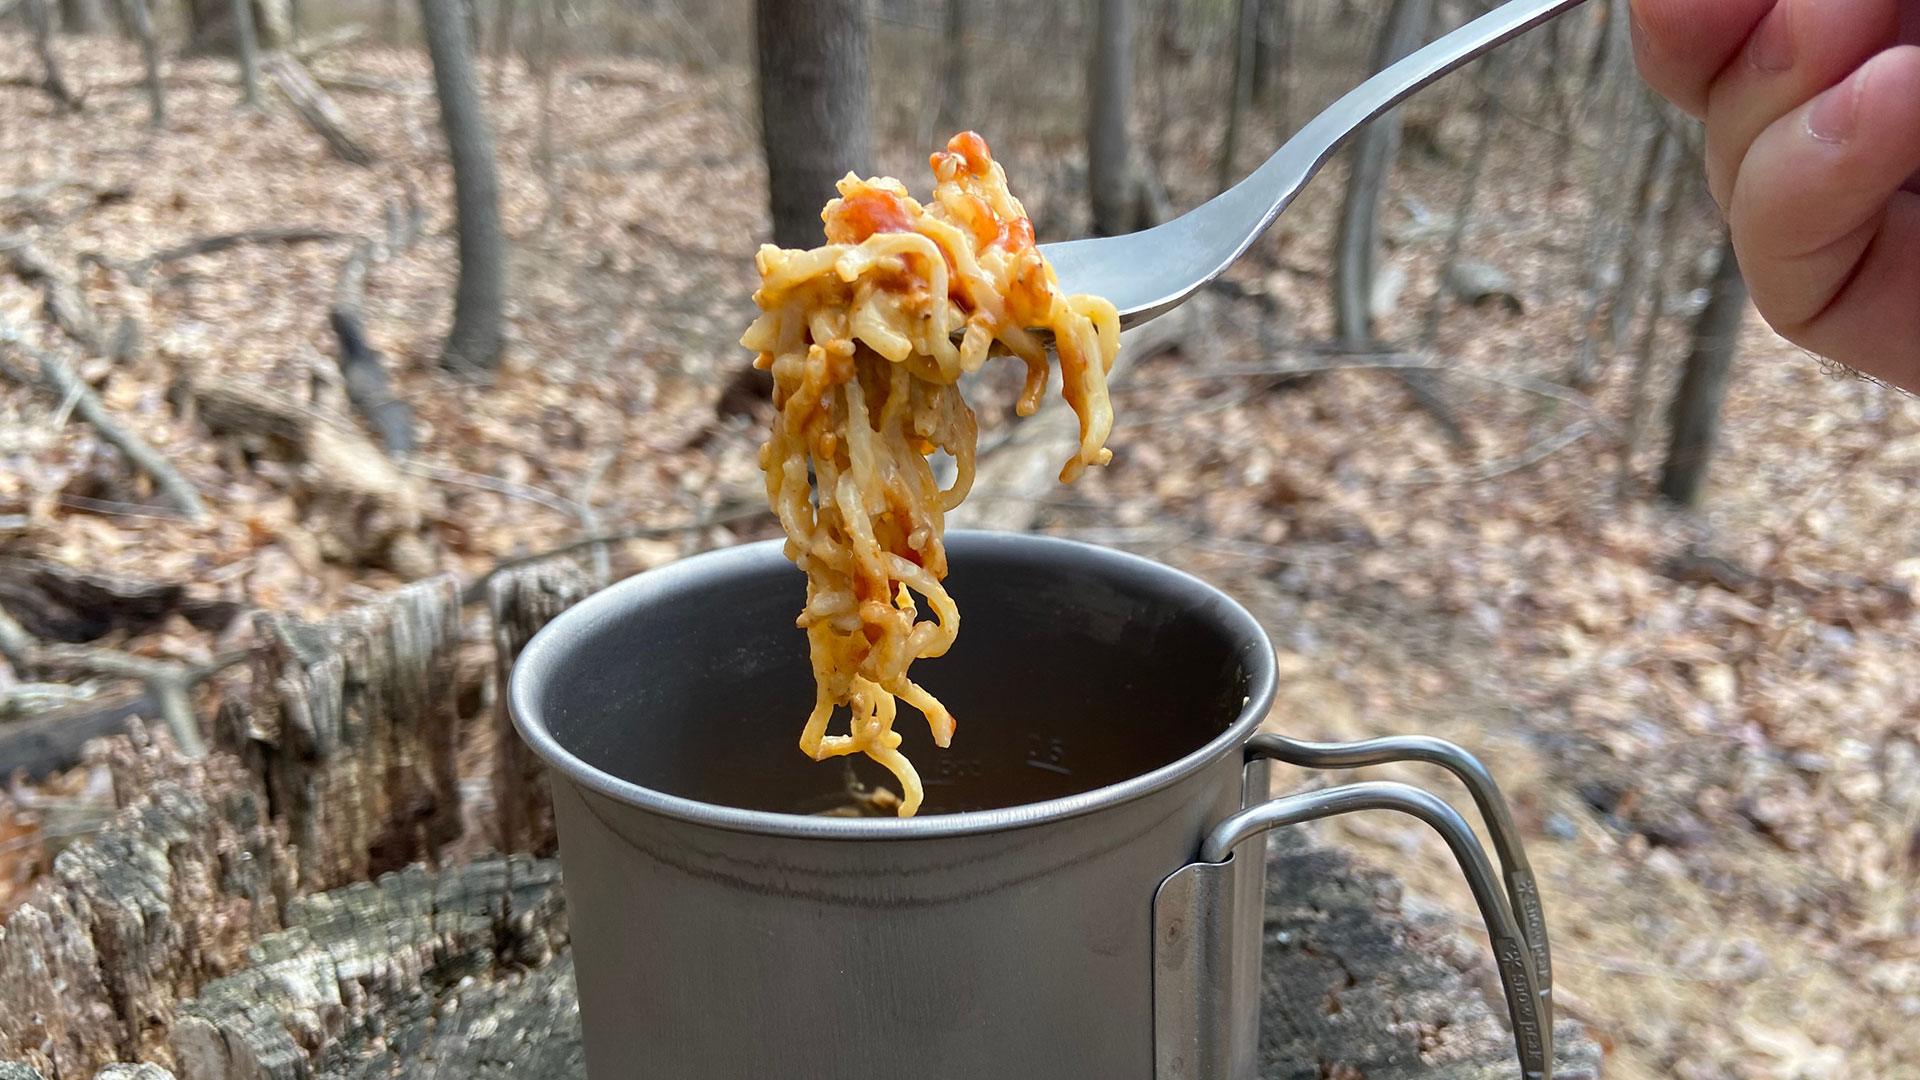 Jordan's Trail-Tested Spicy Peanut Noodles